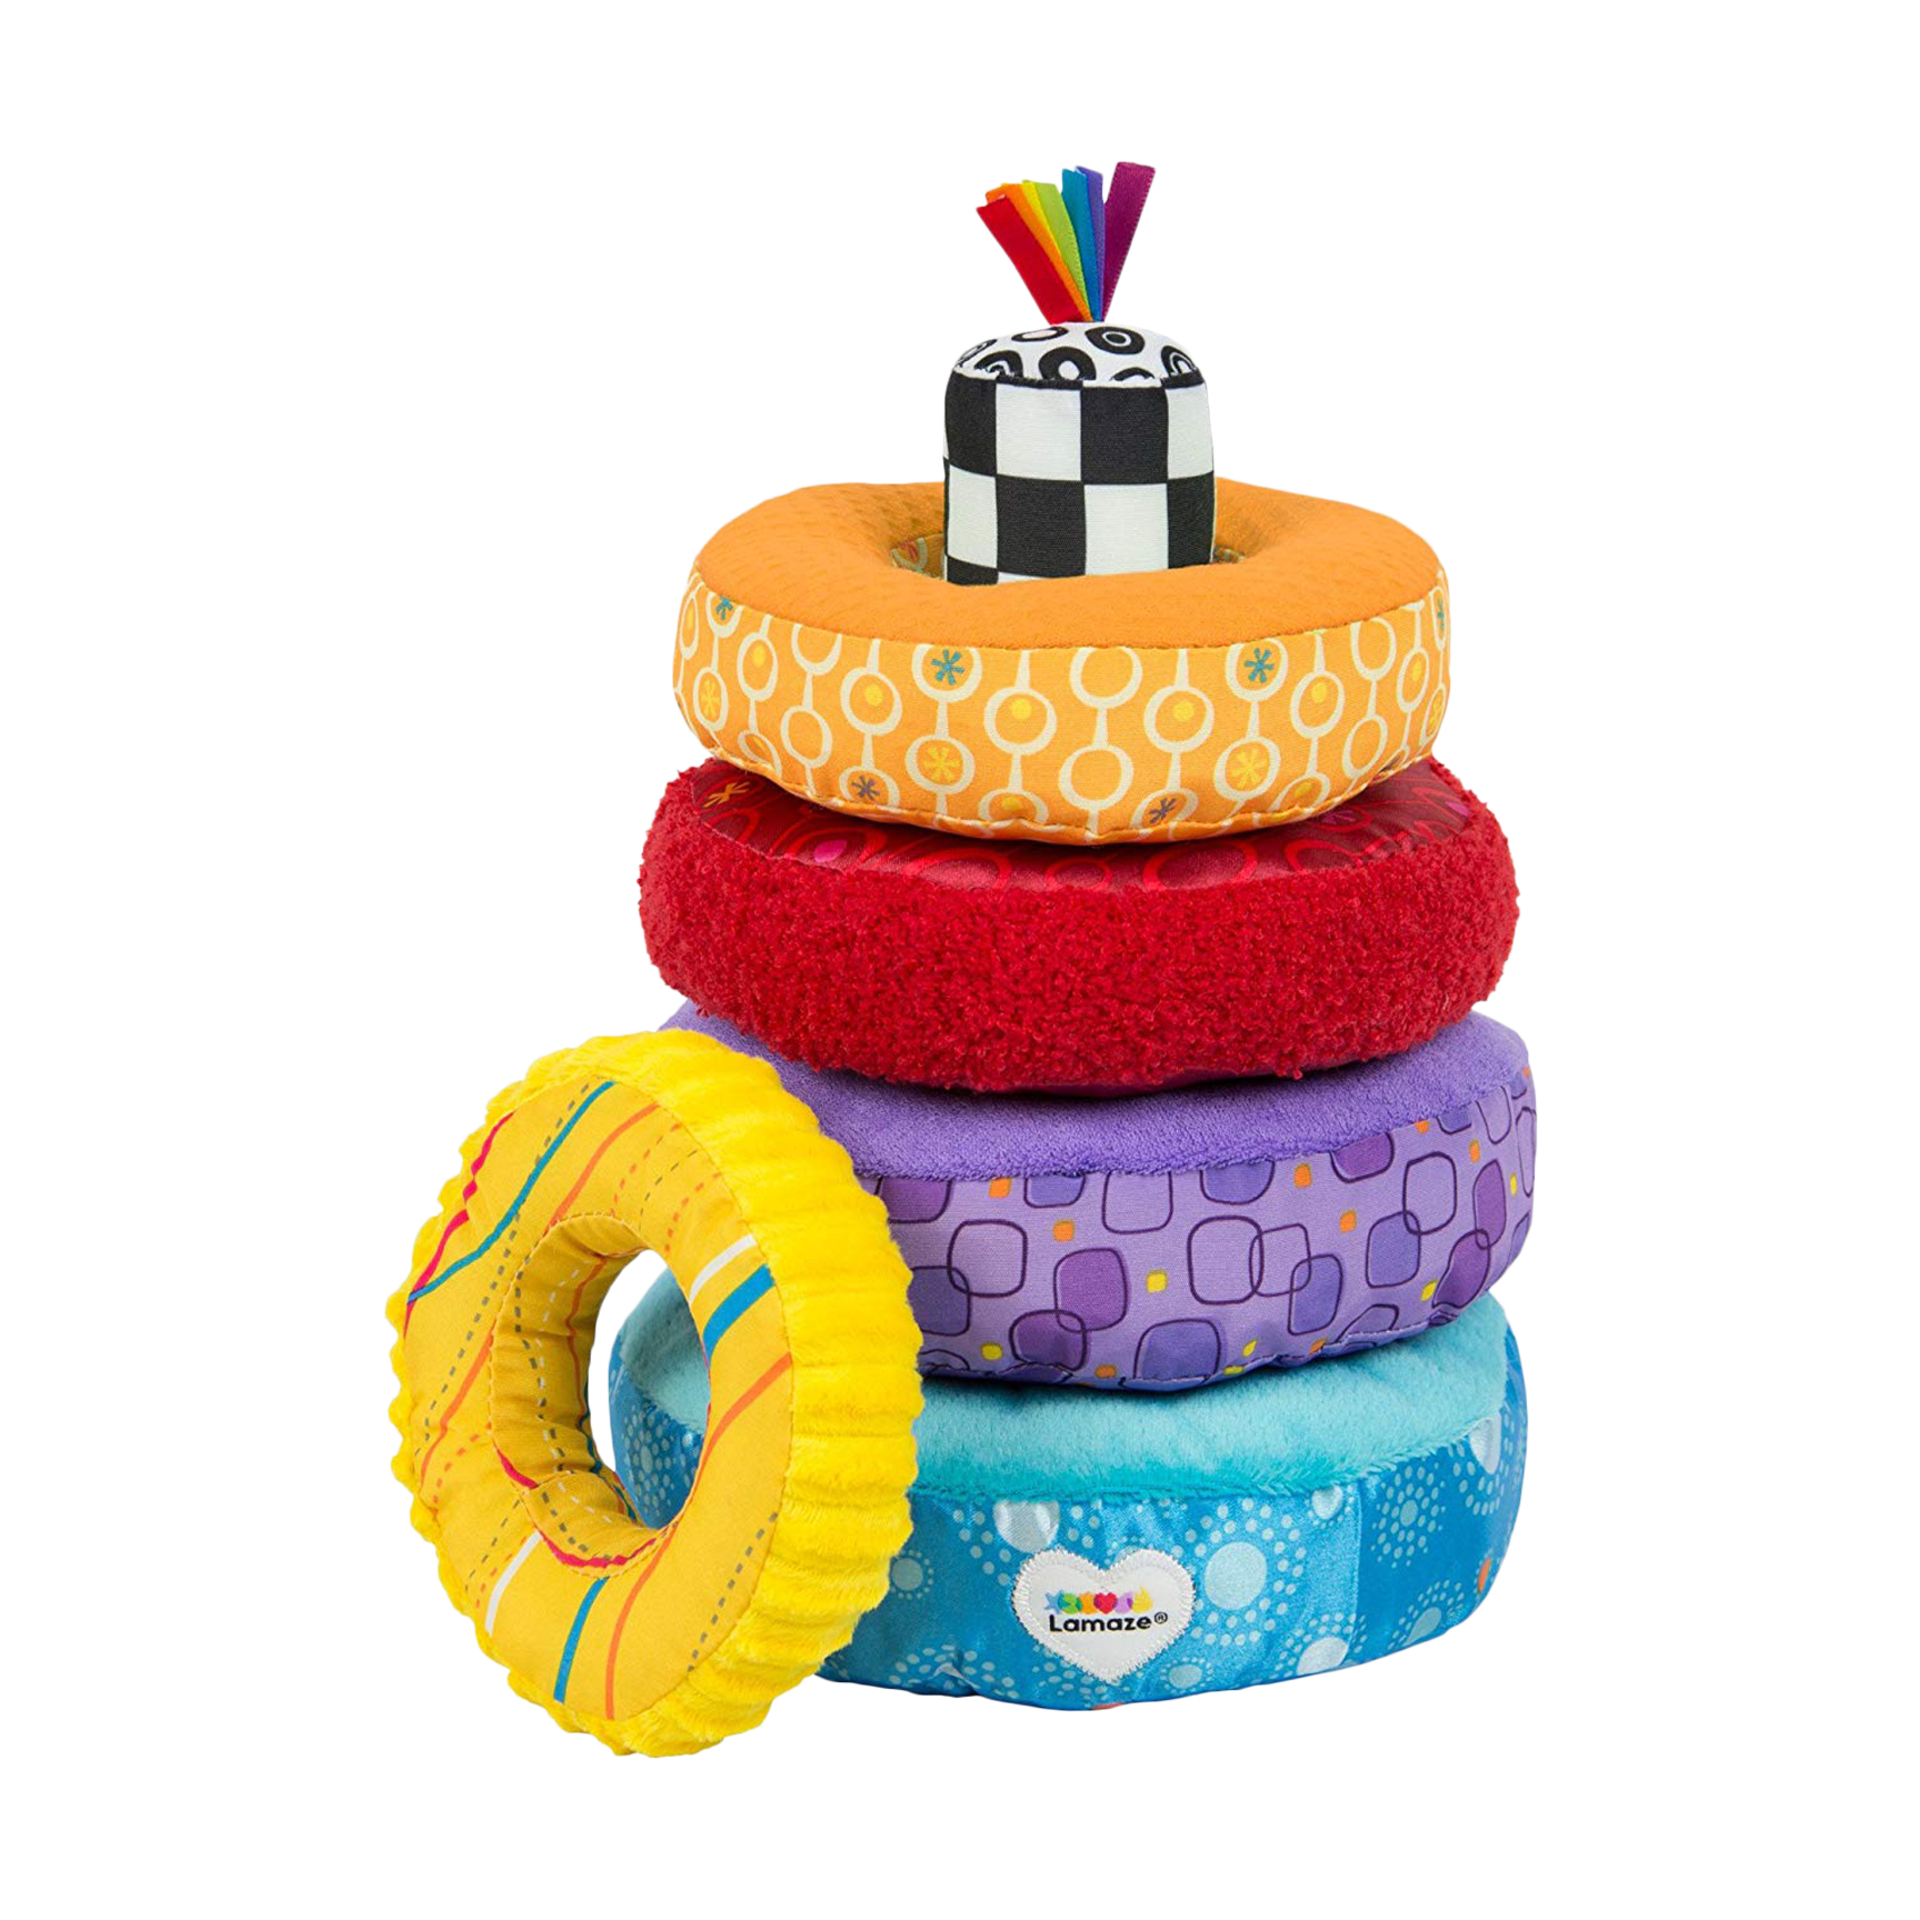 stackable baby toys